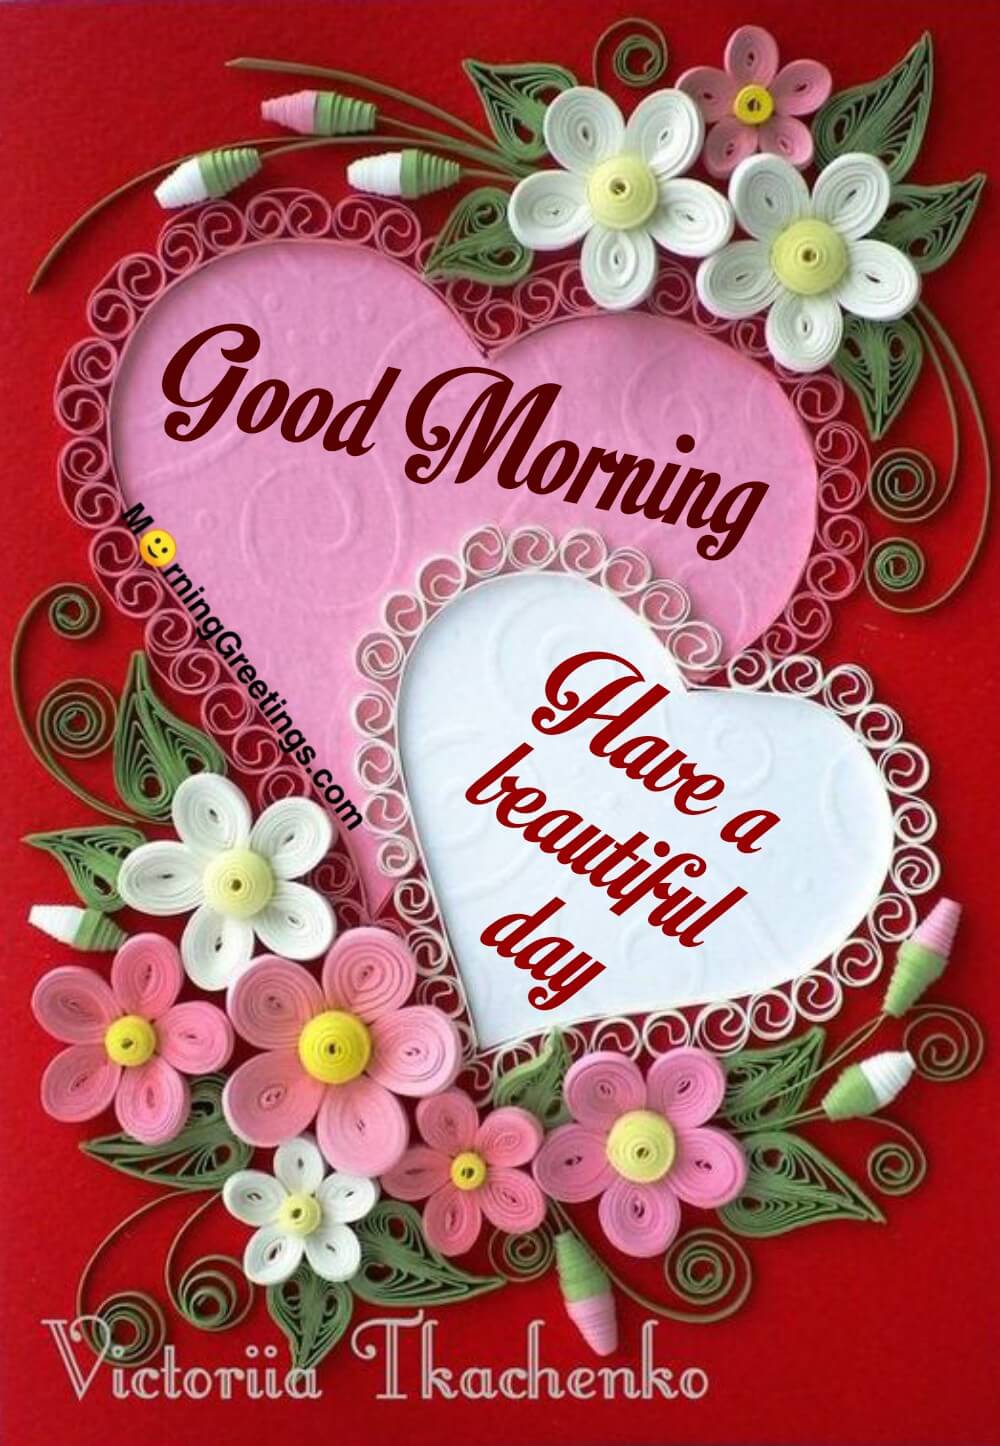 25 Beautiful Good Morning Heart Pictures - Morning Greetings – Morning